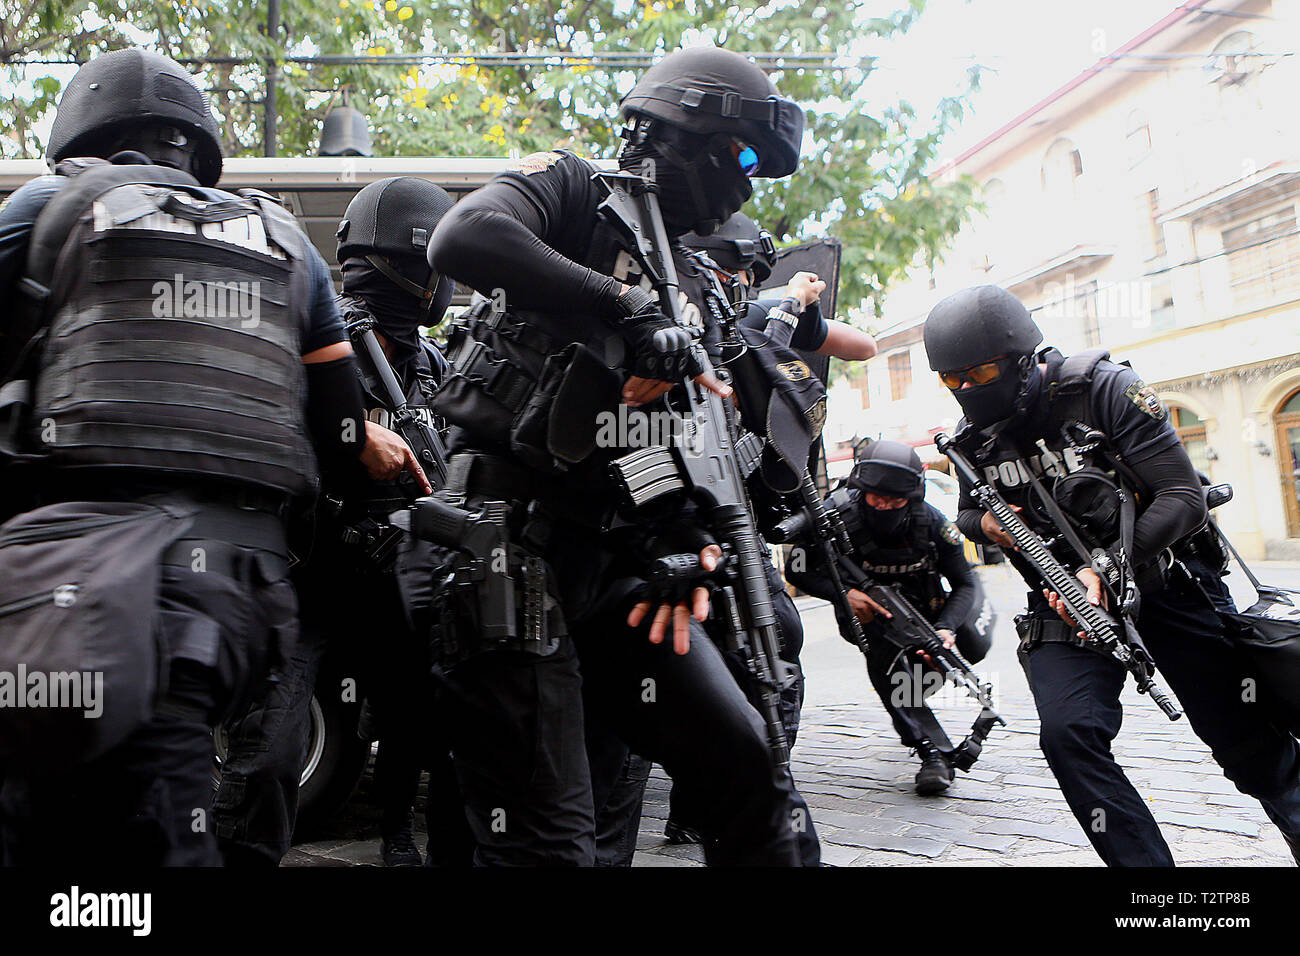 Manila, Philippines. 4th Apr, 2019. Members of the Philippine National Police's Special Weapons and Tactics (PNP-SWAT) participate in an anti-terrorism drill in Manila, the Philippines, April 4, 2019. Philippine security forces have tightened security after Wednesday's blast in southern Philippine Isulan town in Sultan Kudarat province that wounded 18 people at least, a military general said on Thursday. Credit: Rouelle Umali/Xinhua/Alamy Live News Stock Photo